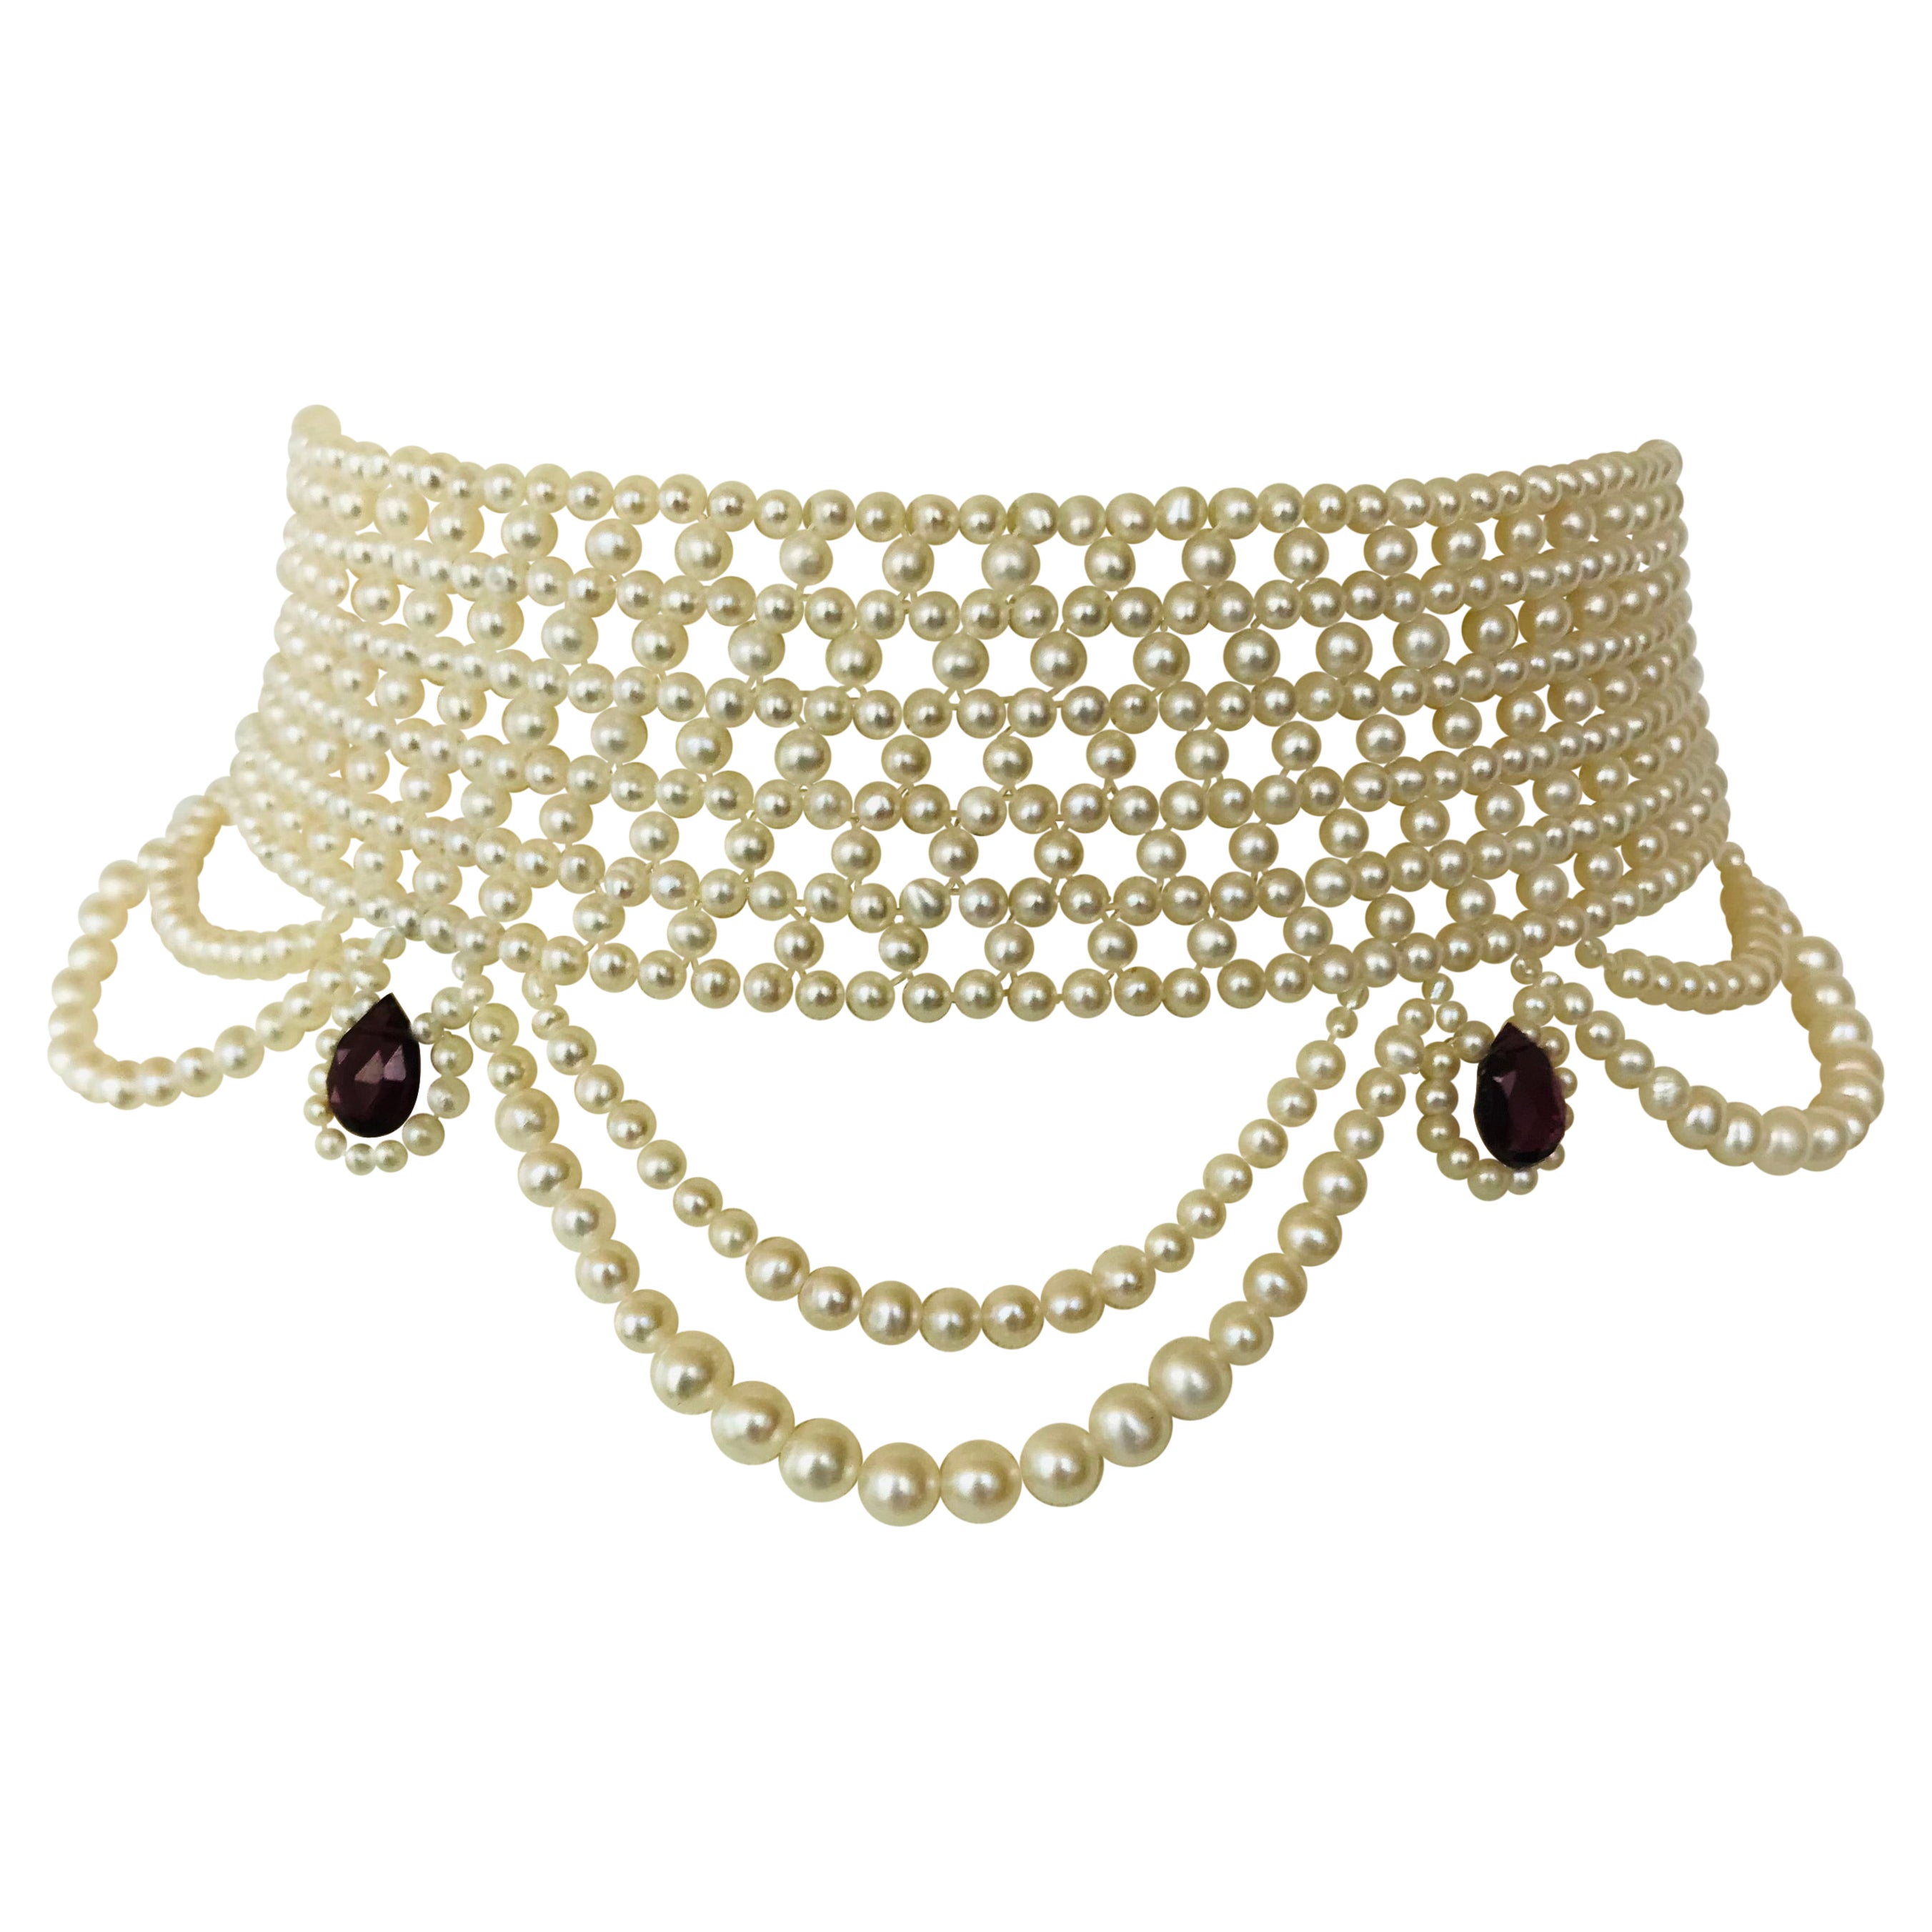 Marina J Woven Pearl Choker with Pearl Drapes, Garnet Briolettes and 14 K Gold